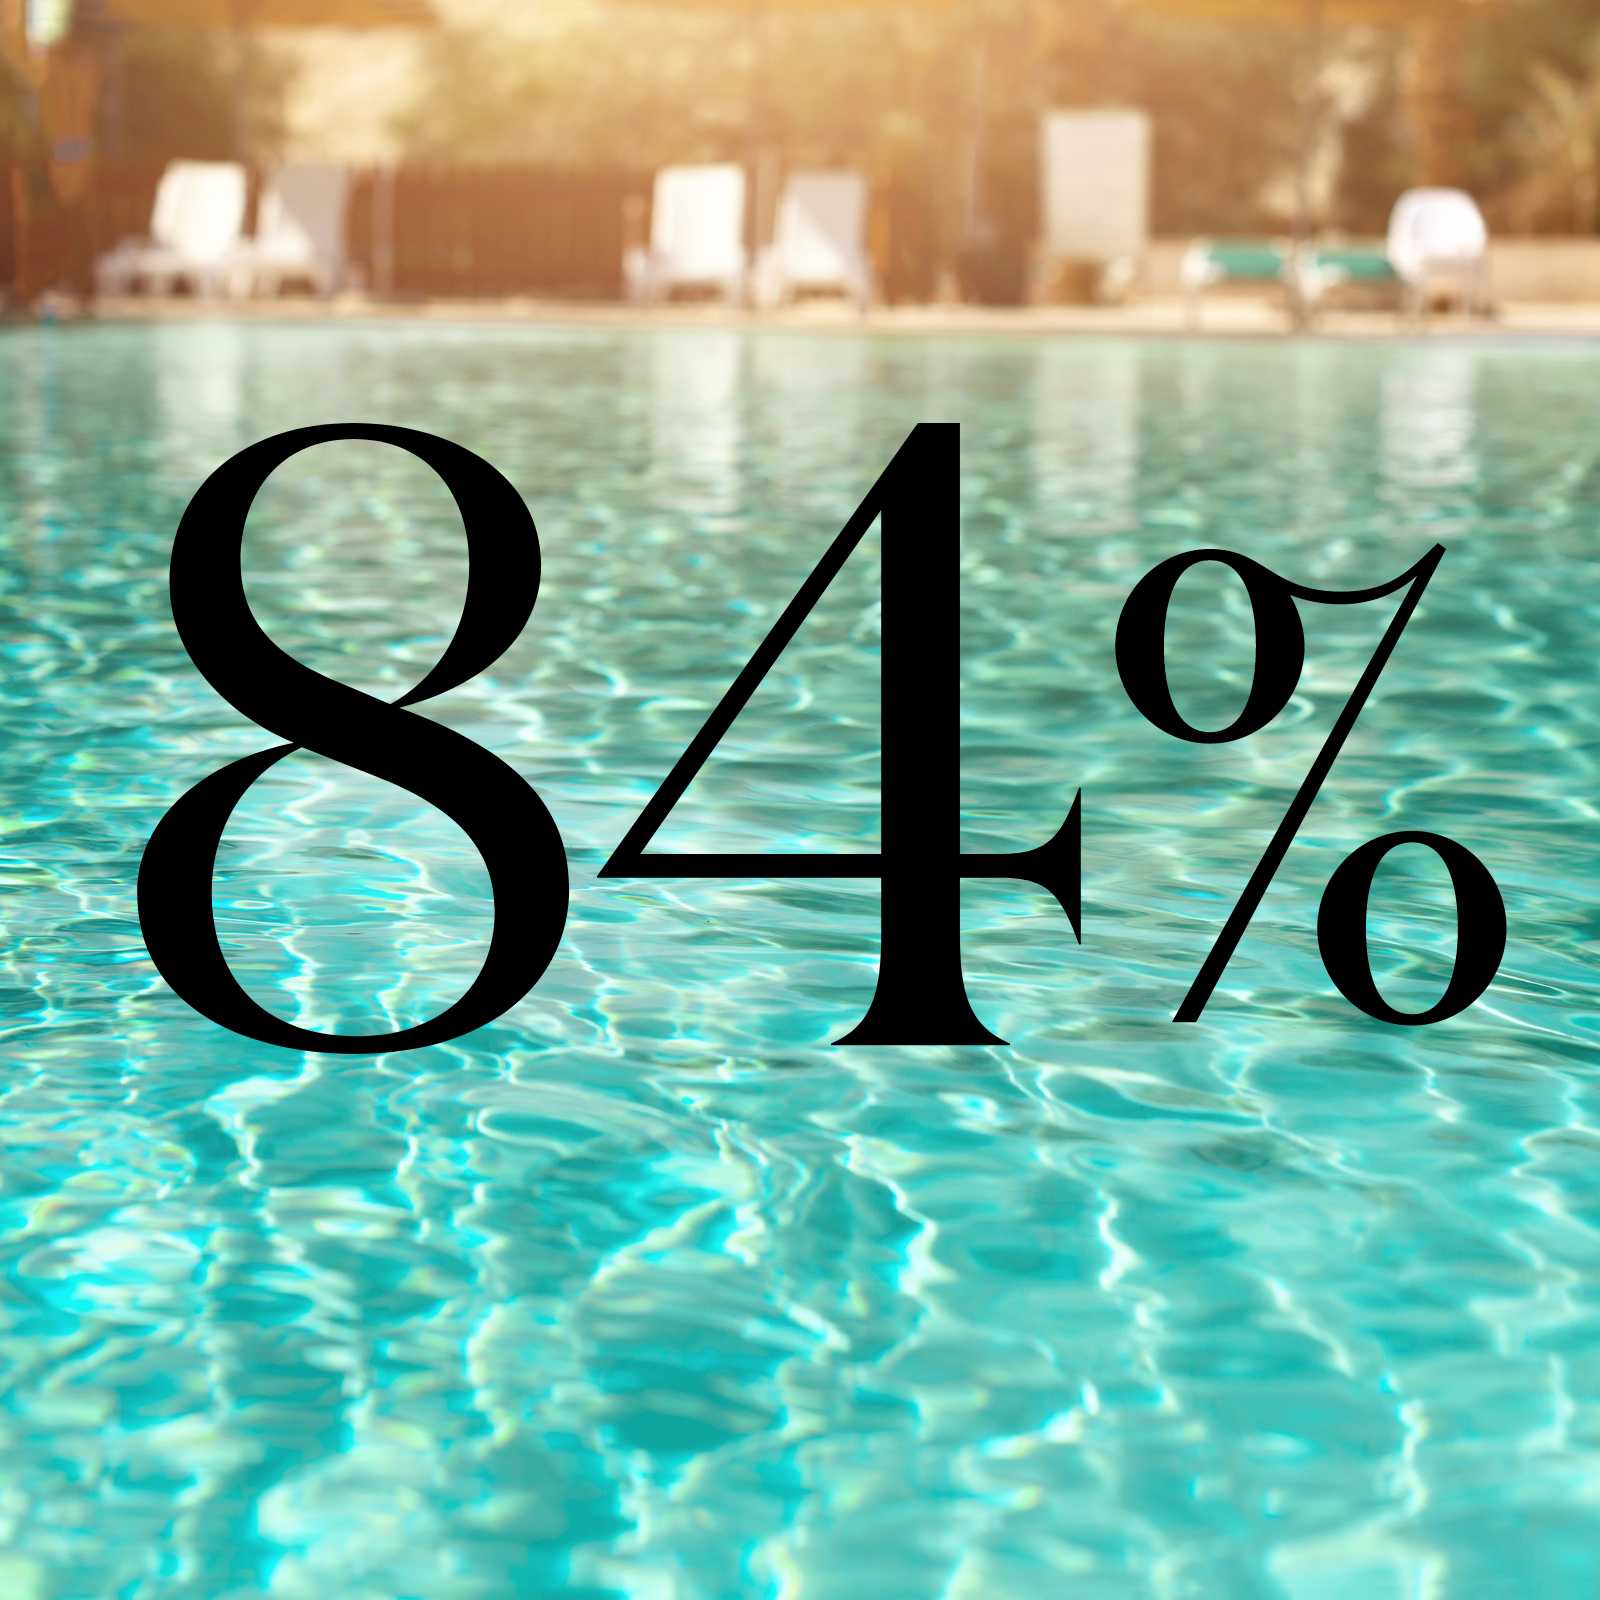 84% written on top of a pool background